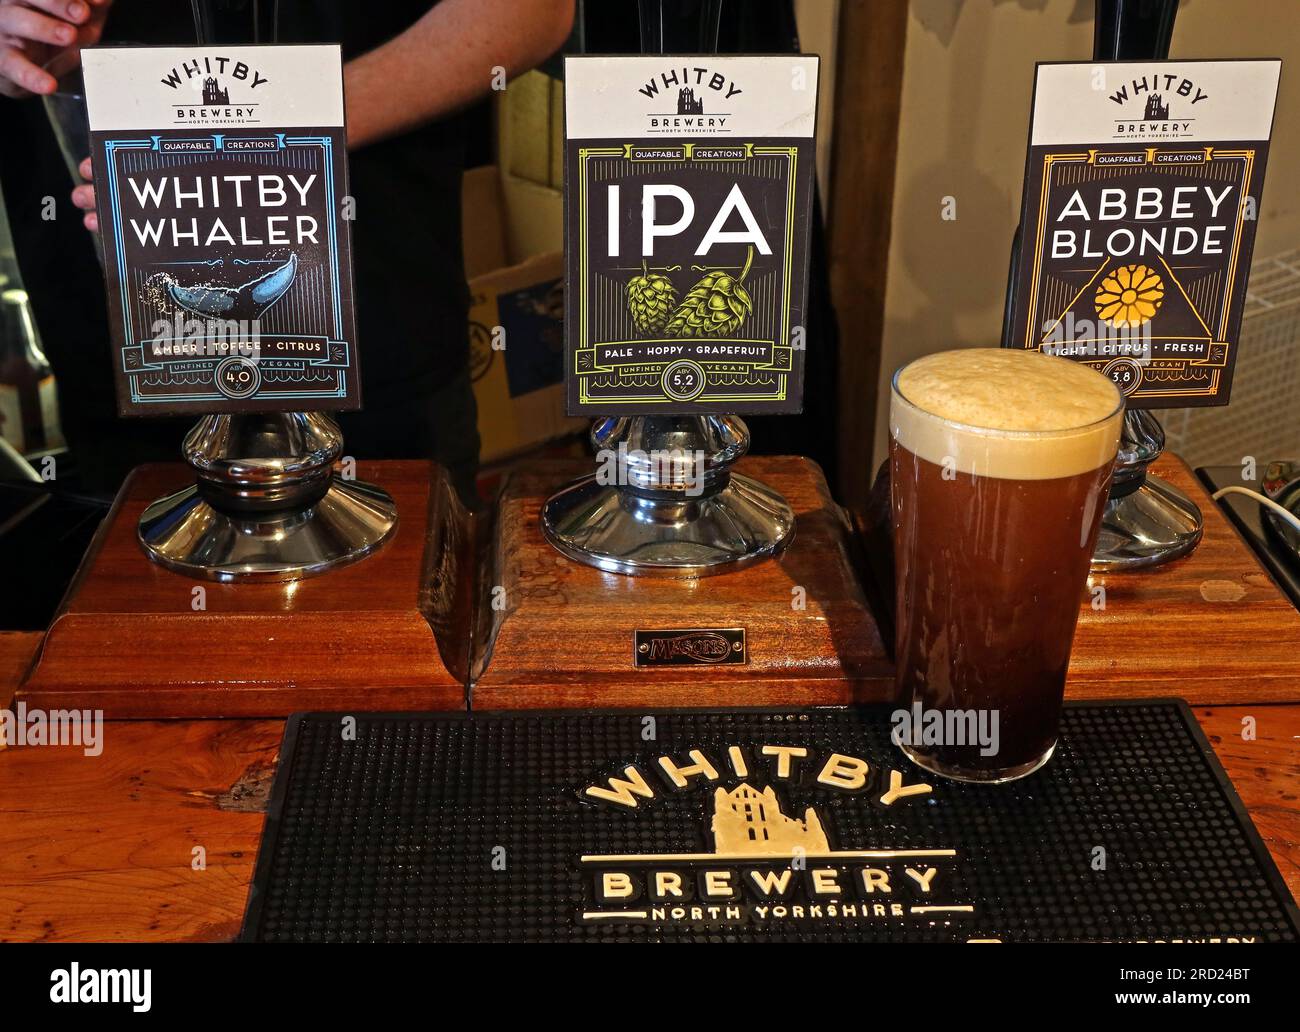 Inside The Whitby Brewery Ltd, since 2013, East Cliff, Whitby, North Yorkshire, England, UK, YO22 4JR Stock Photo